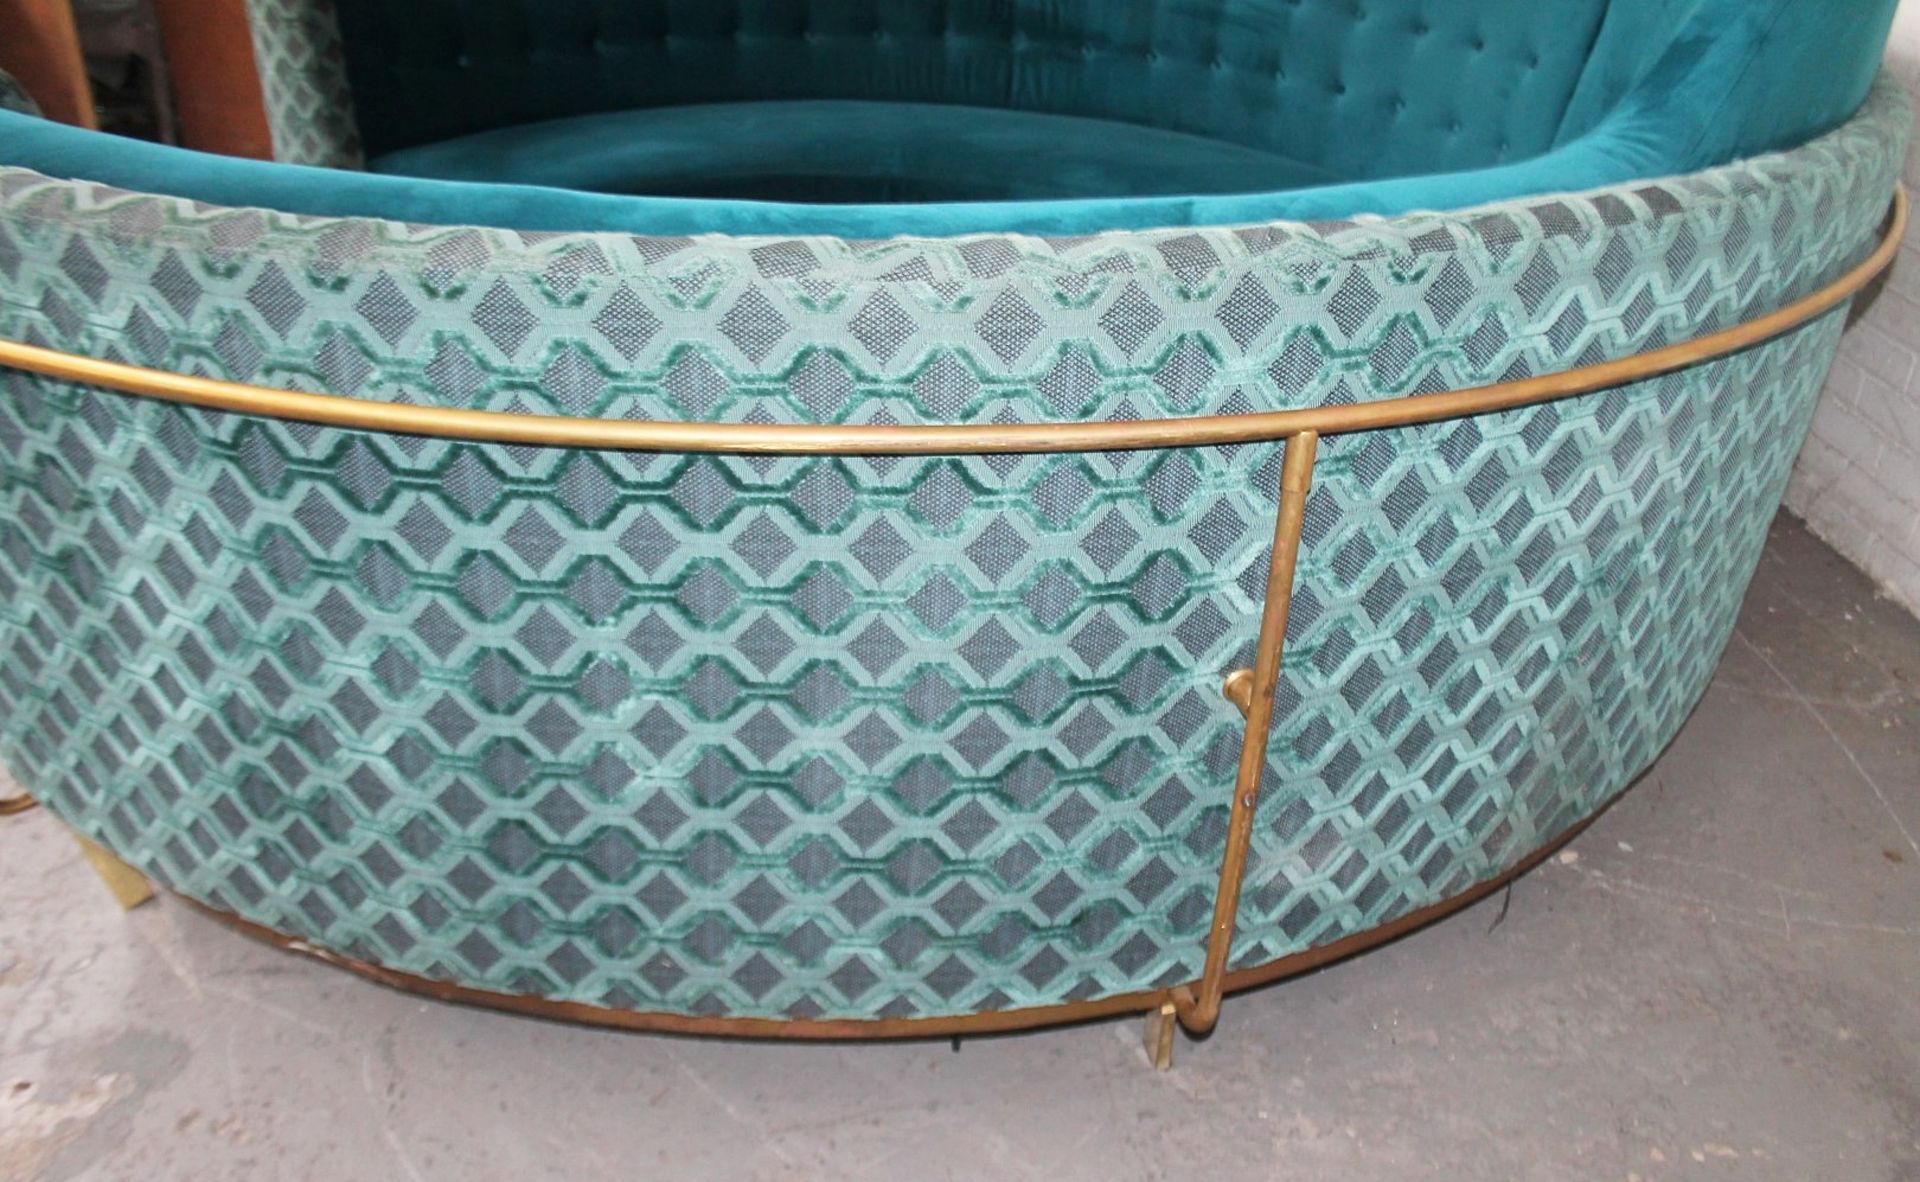 1 x Bespoke Commercial Curved C-Shaped Booth Seating Upholstered In Premium Teal Coloured Fabrics - - Image 10 of 17